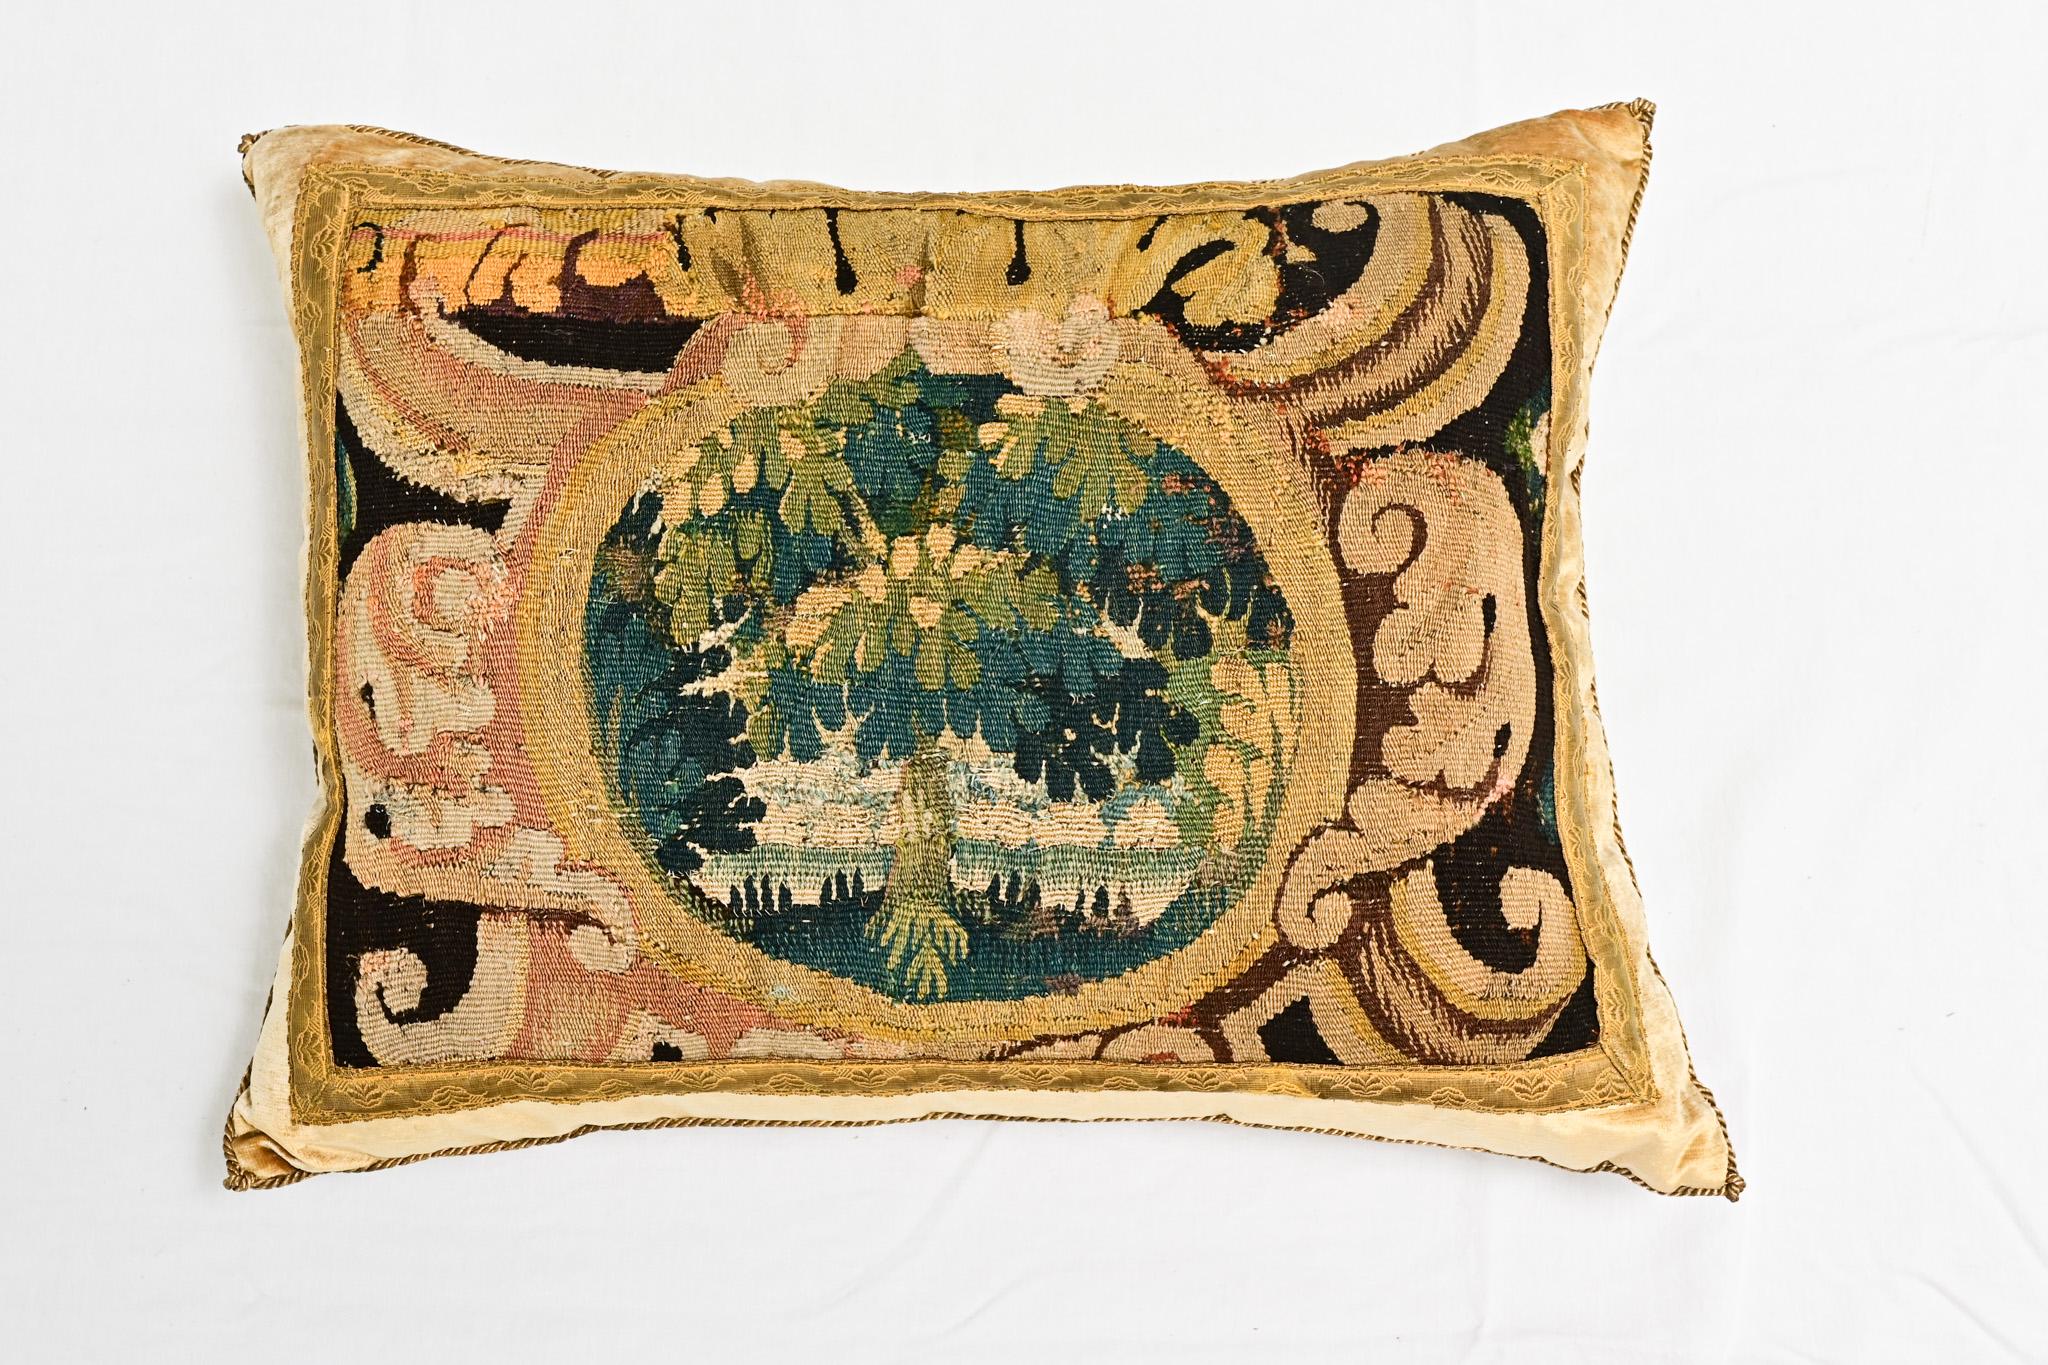 A single 18th Century tapestry fragment and velvet pillow. Hand trimmed and features vintage gold metallic cording, knotted in the corners. Designed by Rebecca Vizard for B. Viz Design. This down filled pillow makes a statement with an 18th Century